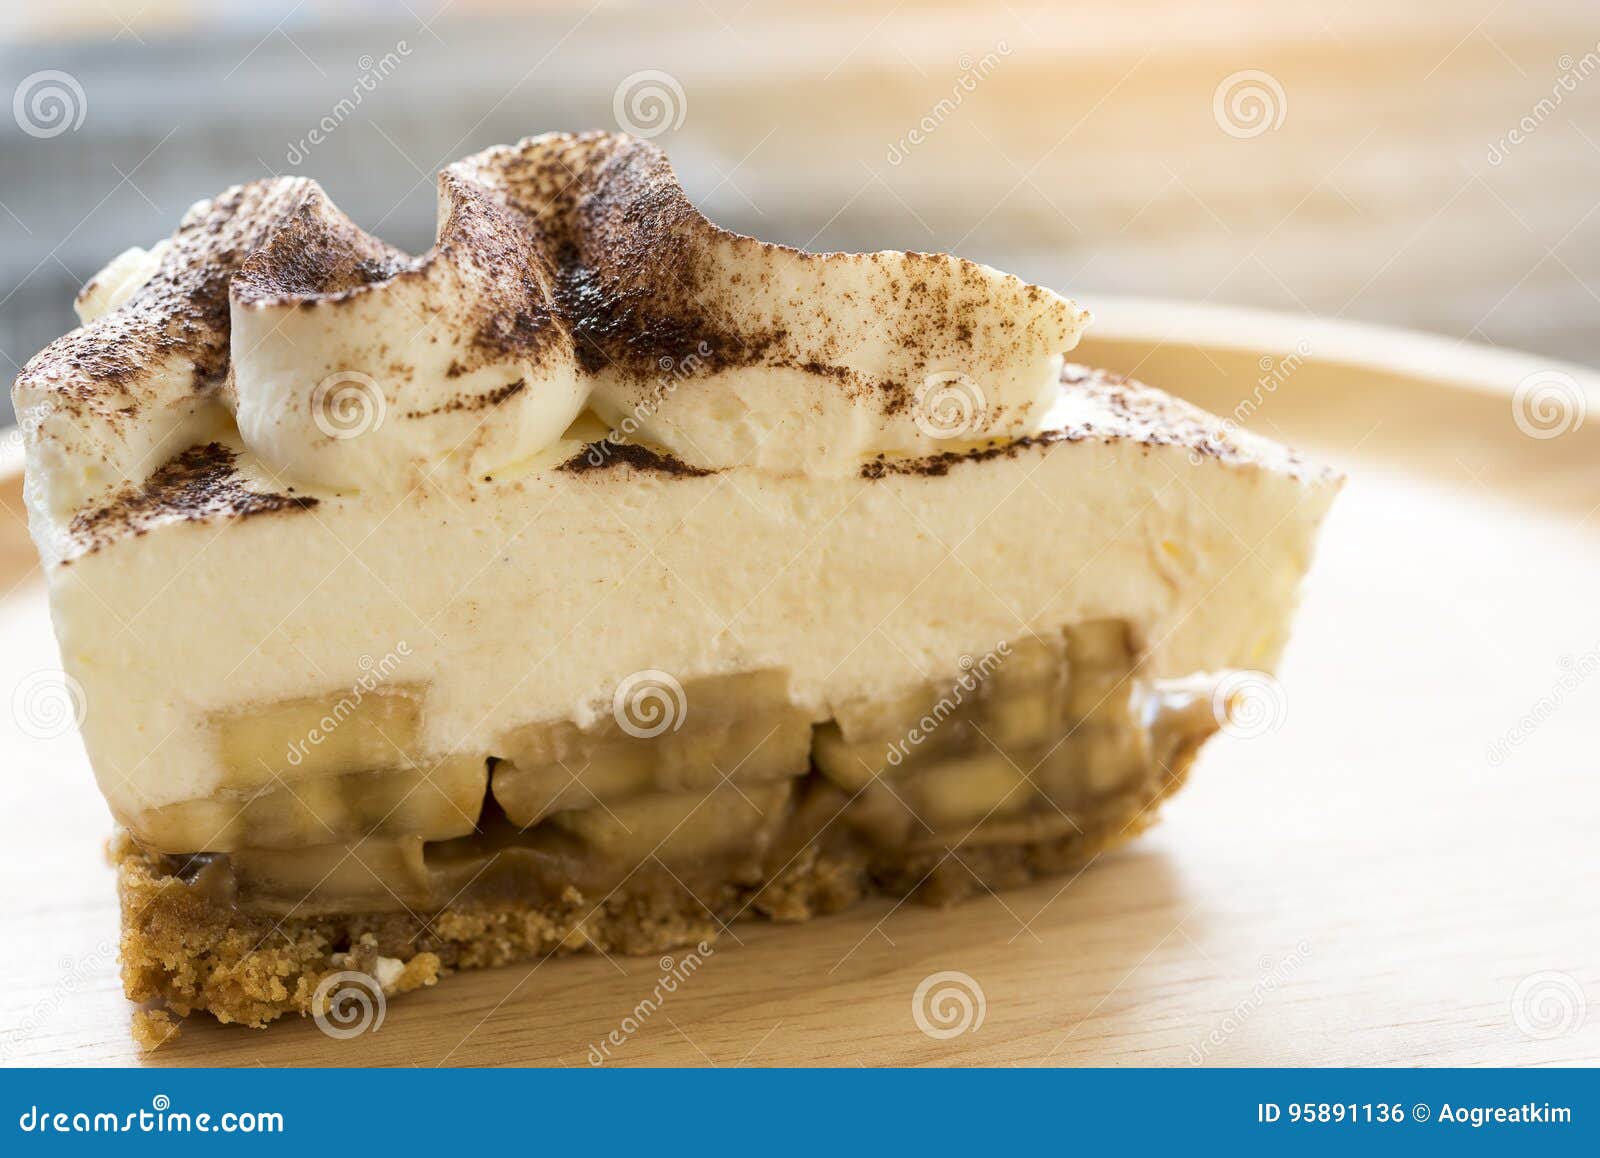 banoffee pie with chocolate powder on wooden plate